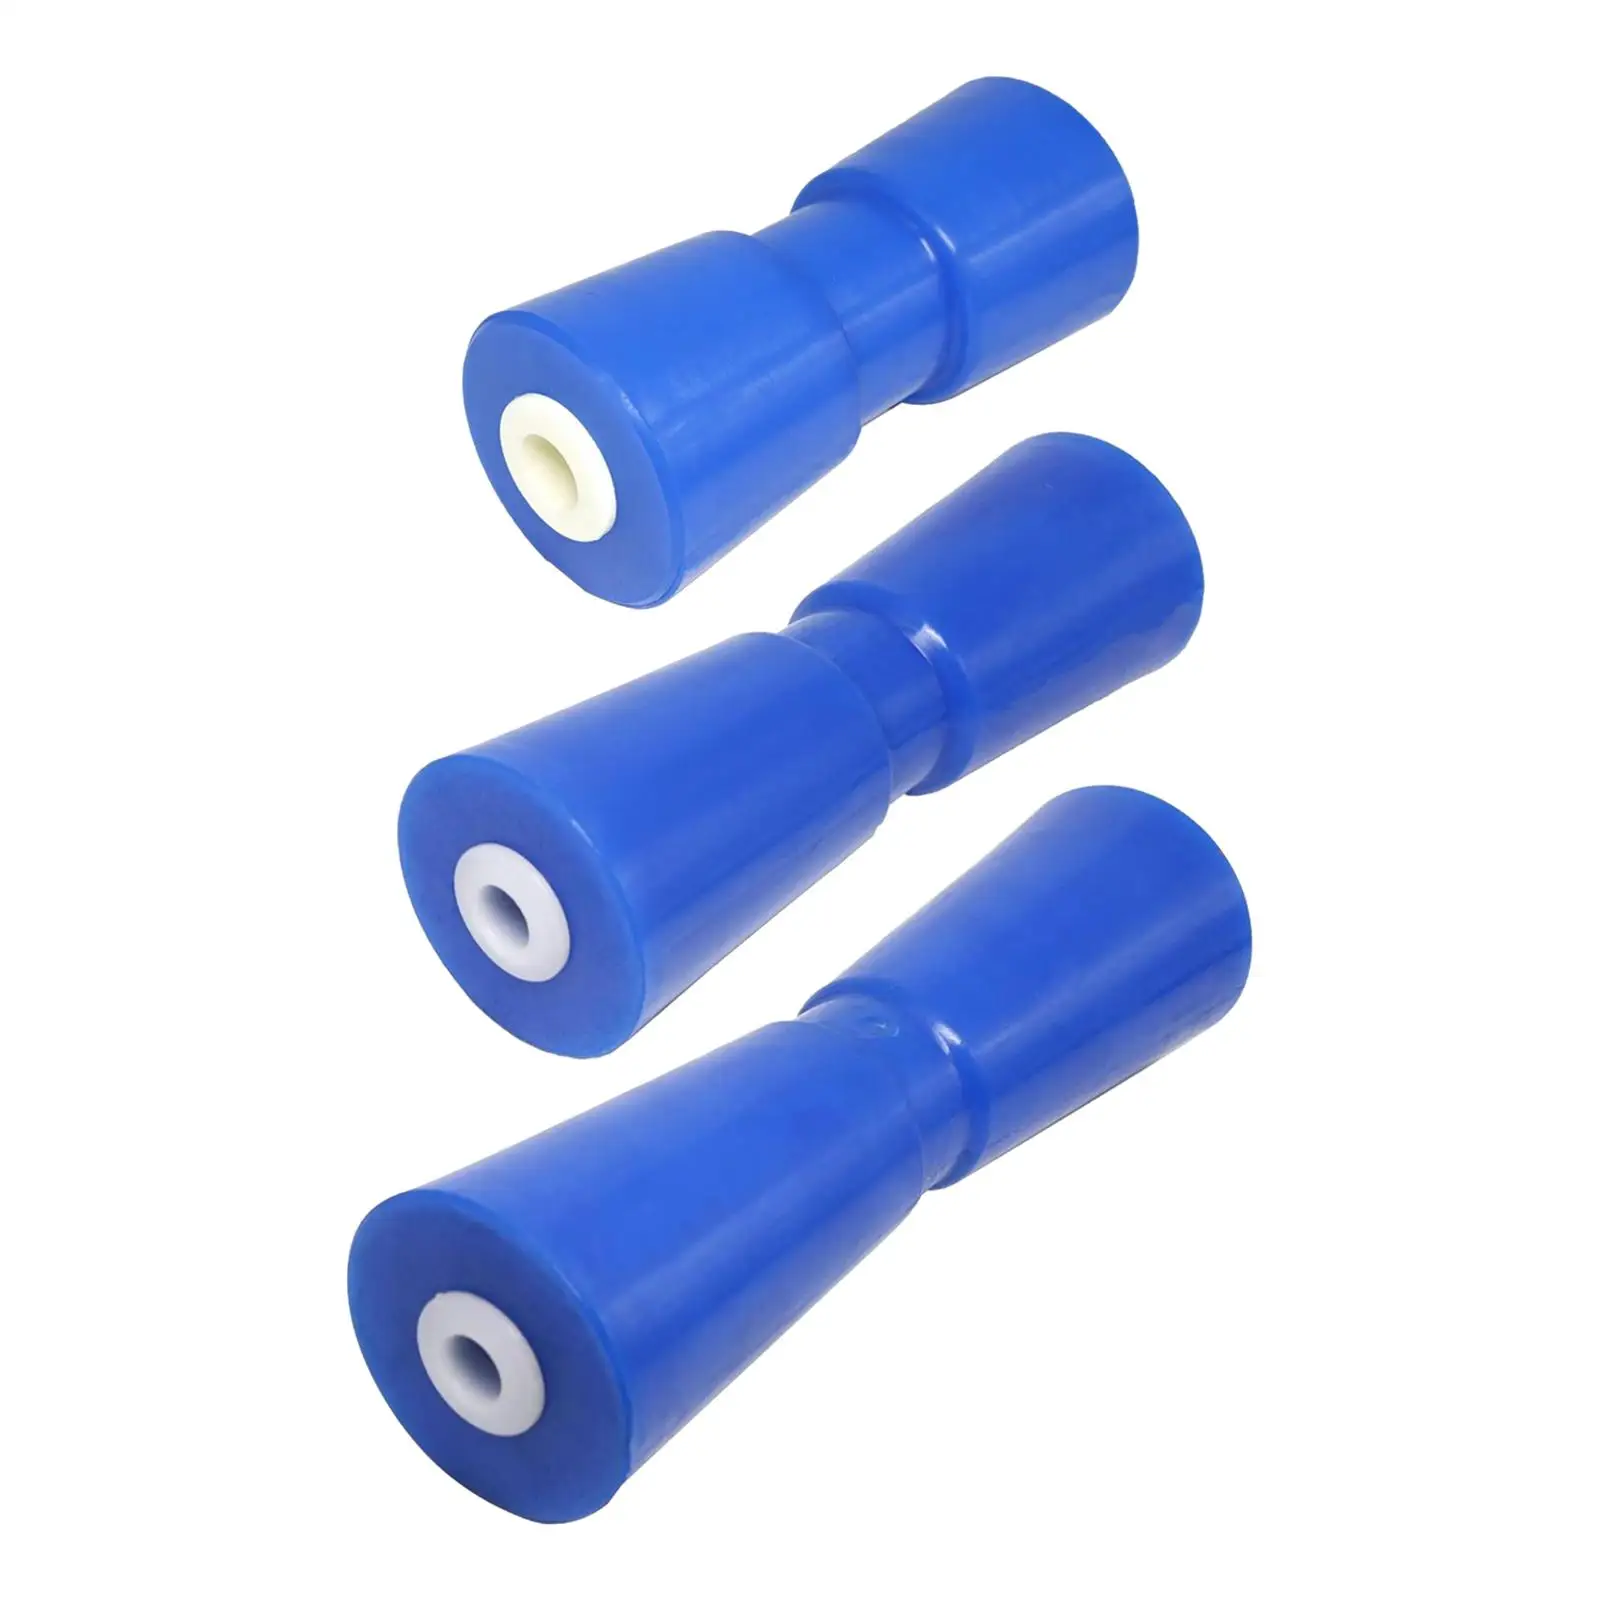 Boat Trailer Roller Bow Stop Components Blue Heavy Duty for Ship Boats